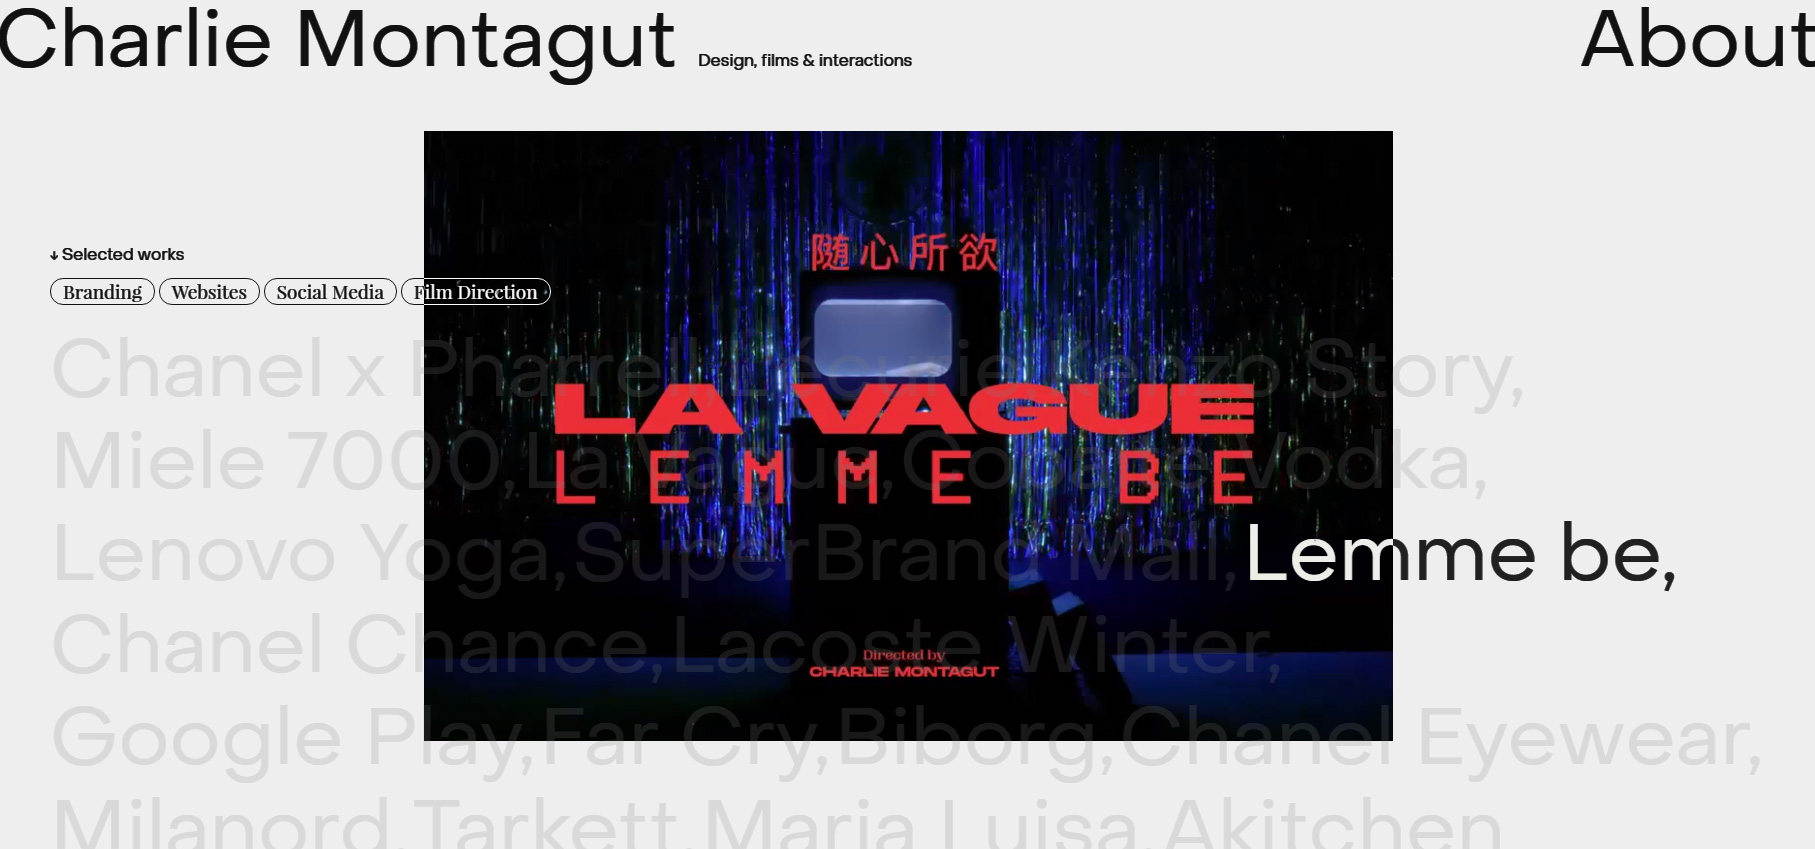 Charlie Montagut - Website of the Day